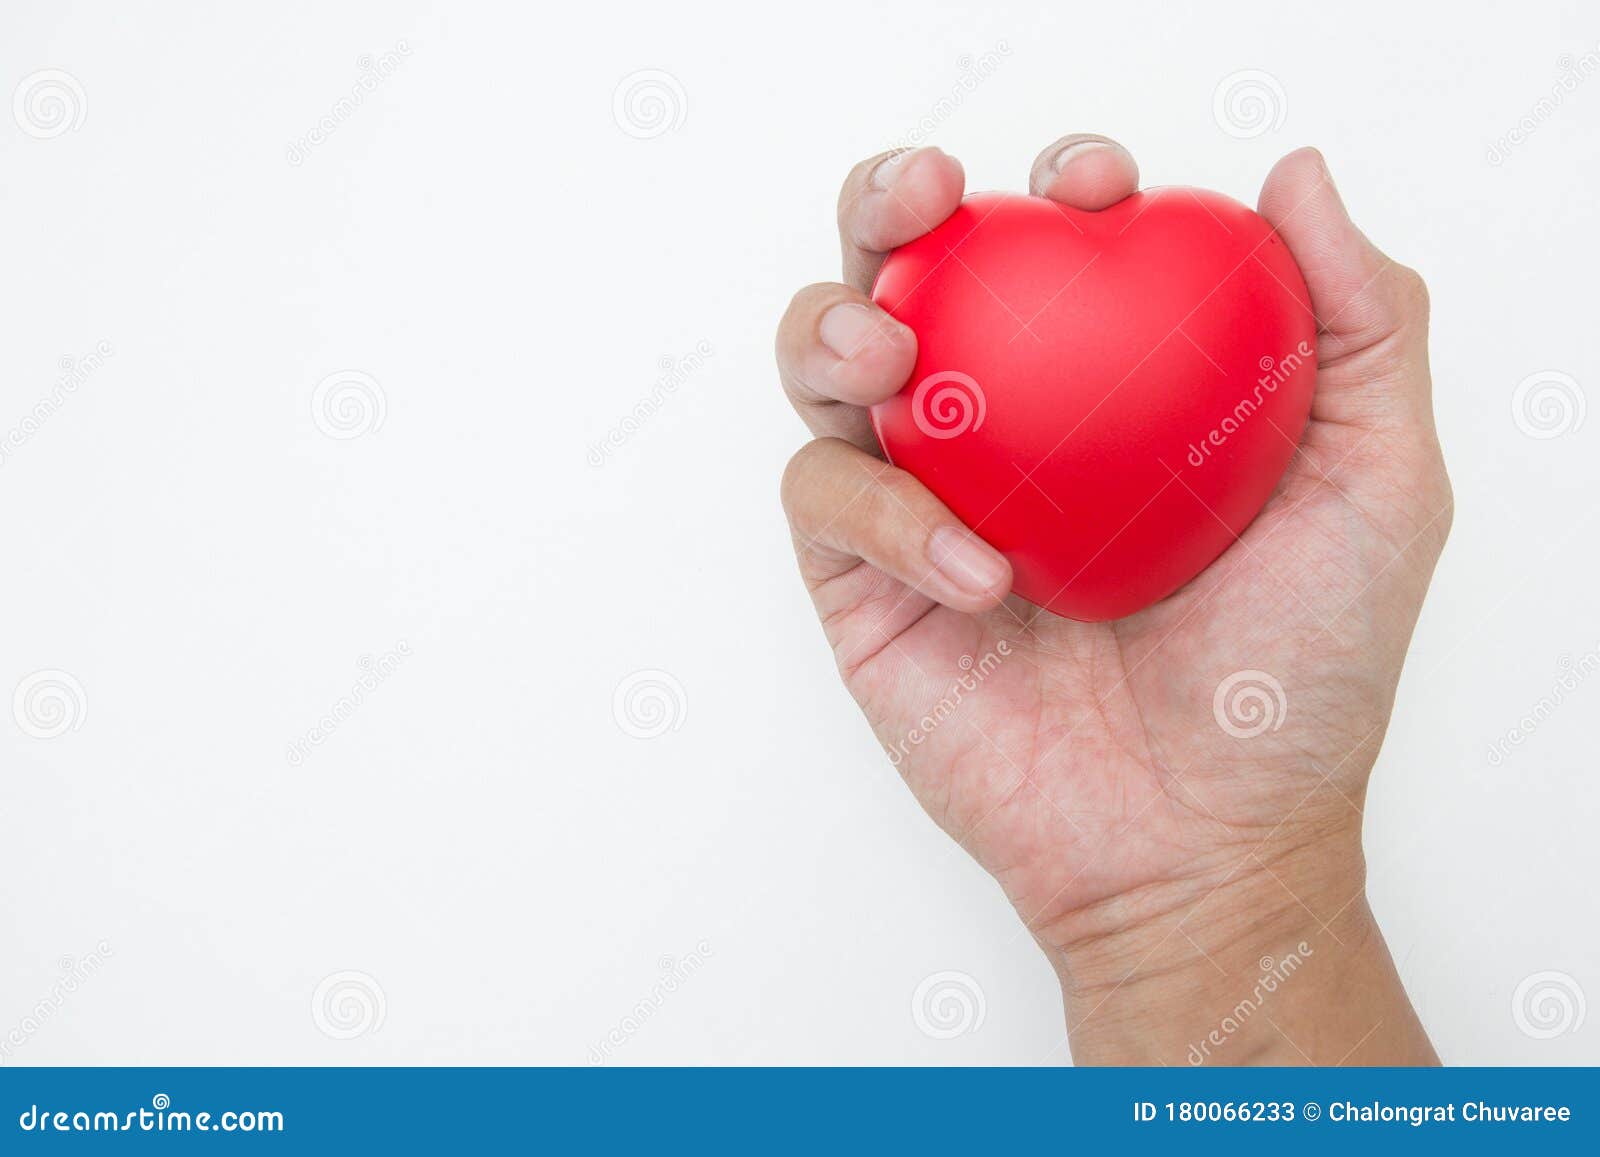 https://thumbs.dreamstime.com/z/hand-holding-heart-shaped-squeeze-ball-muscle-exercise-white-background-copy-space-180066233.jpg